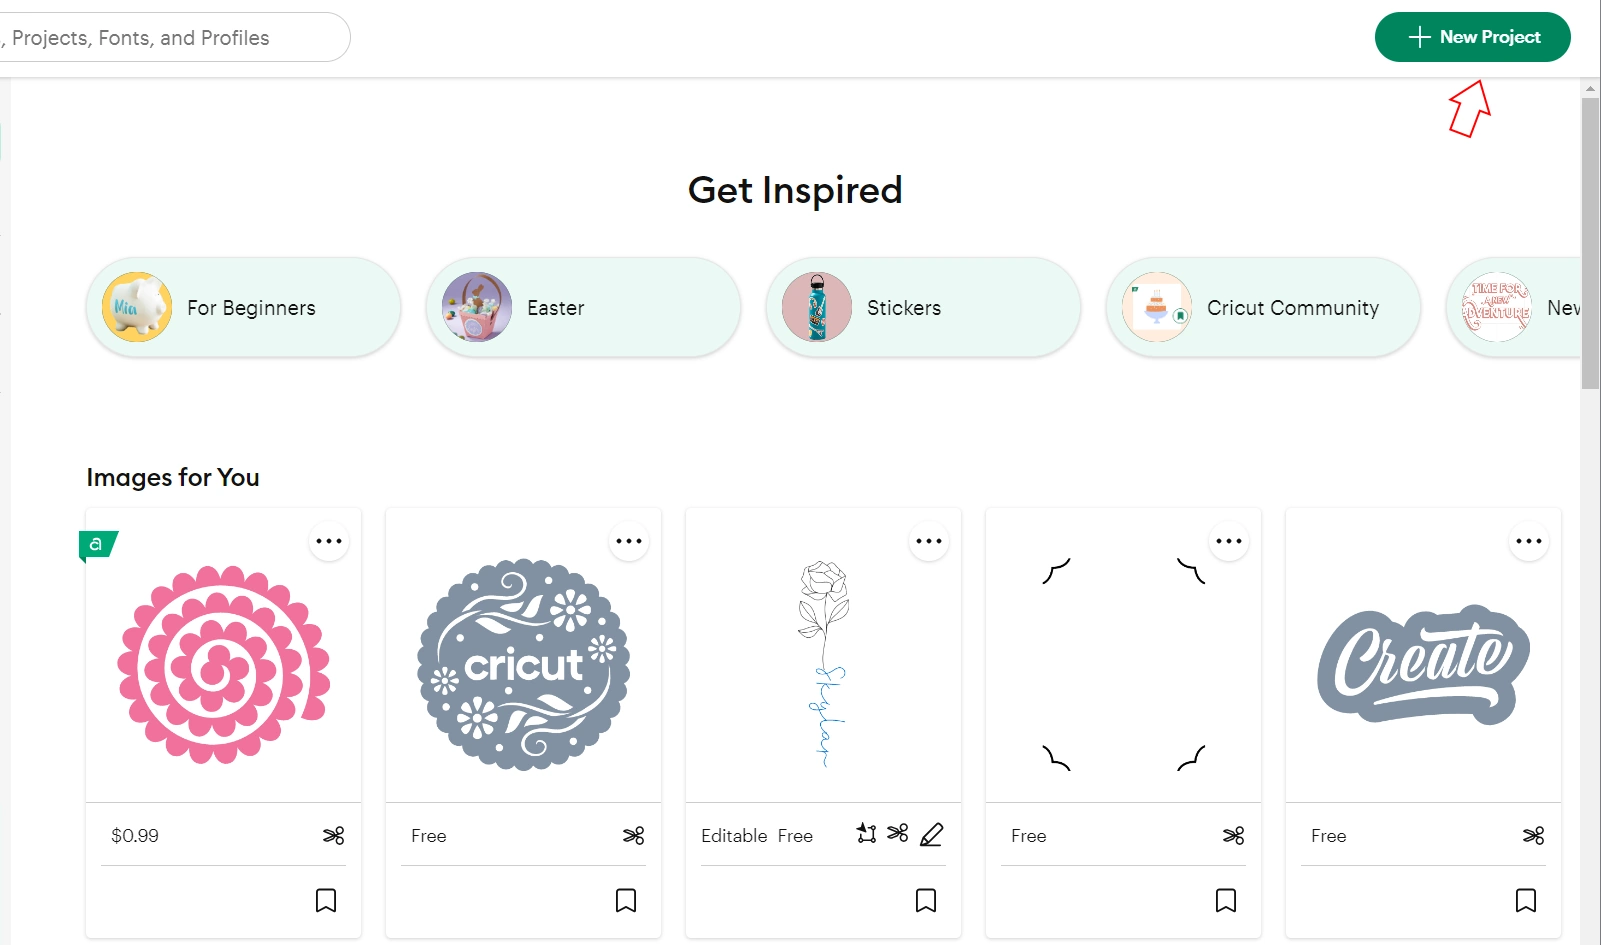 Open Cricut Design Space and click on the New Project button.